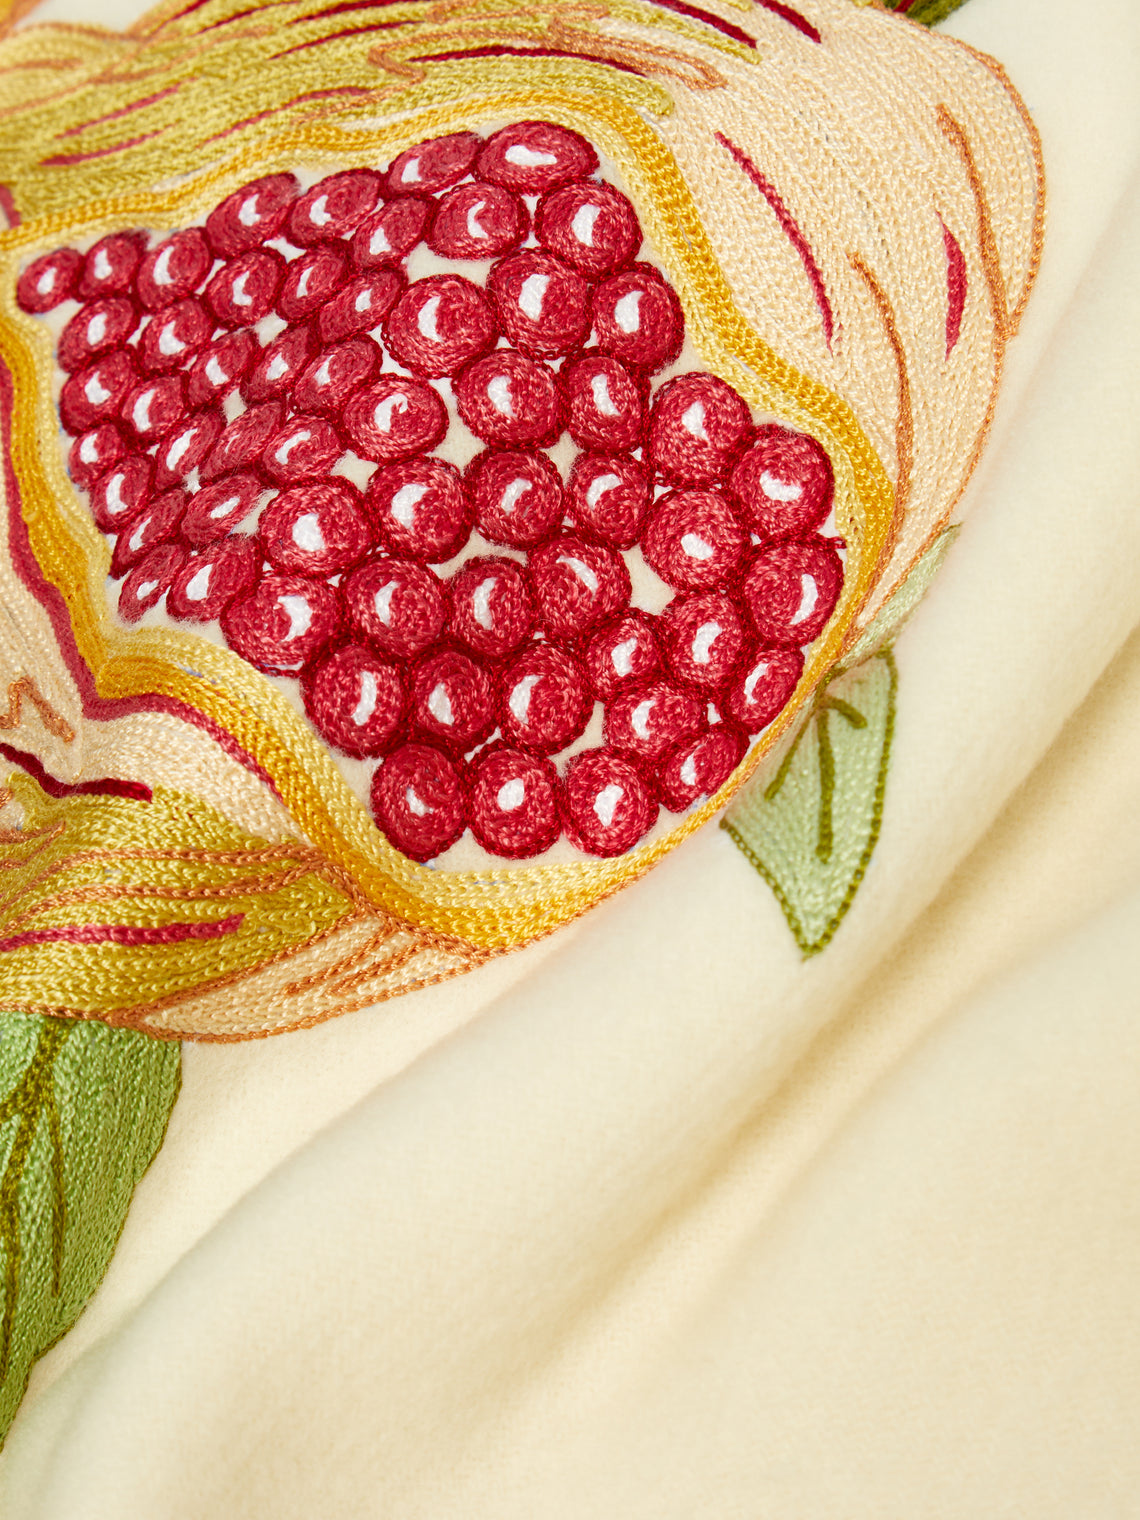 Loretta Caponi - Pomegranate Hand-Embroidered Wool Blanket -  - ABASK